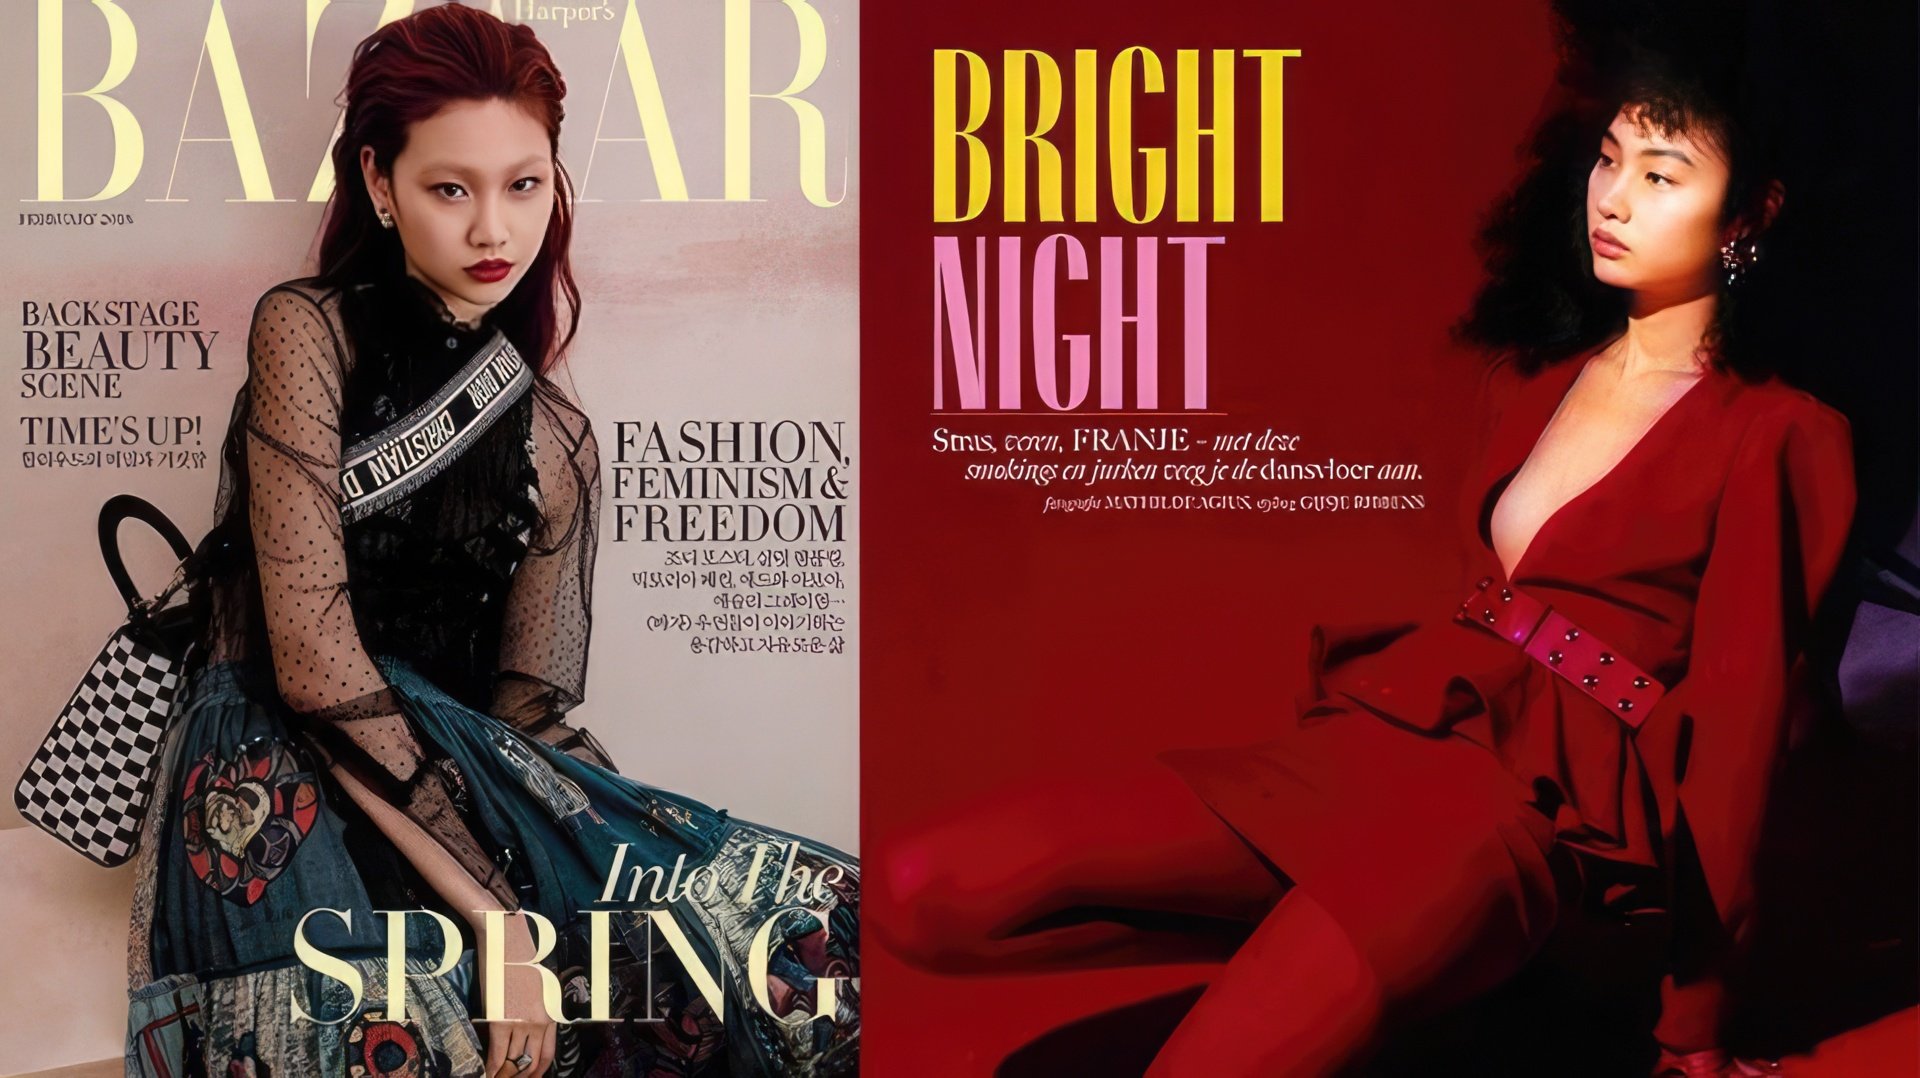 Jung Ho Yeon often appears on the covers of glossy magazines